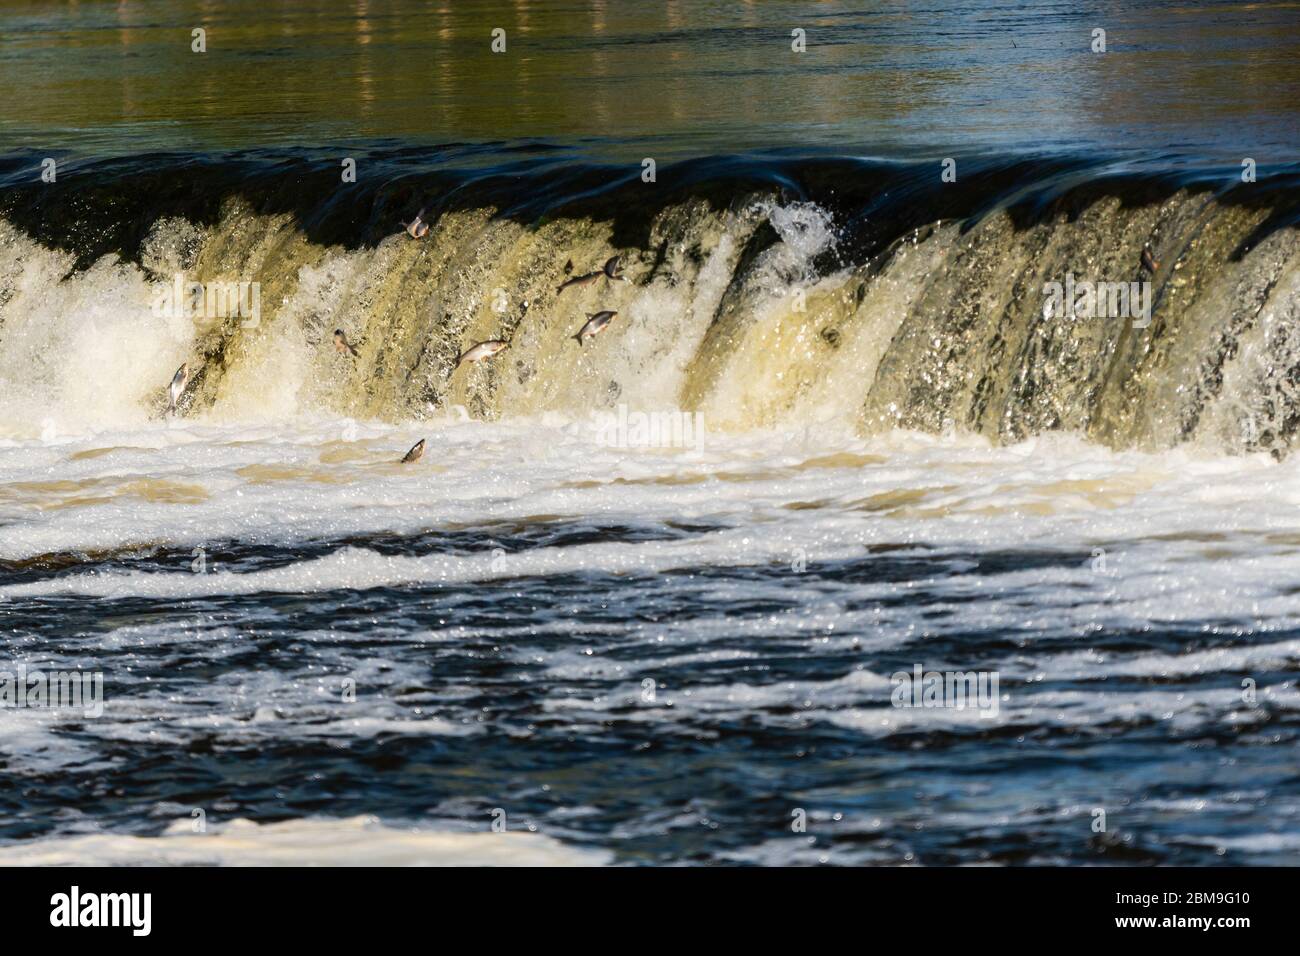 in the spring, fish fly or jump in the widest waterfall in Europe and the fish species is called vimba, which is a fish of the sapalu family that goes Stock Photo